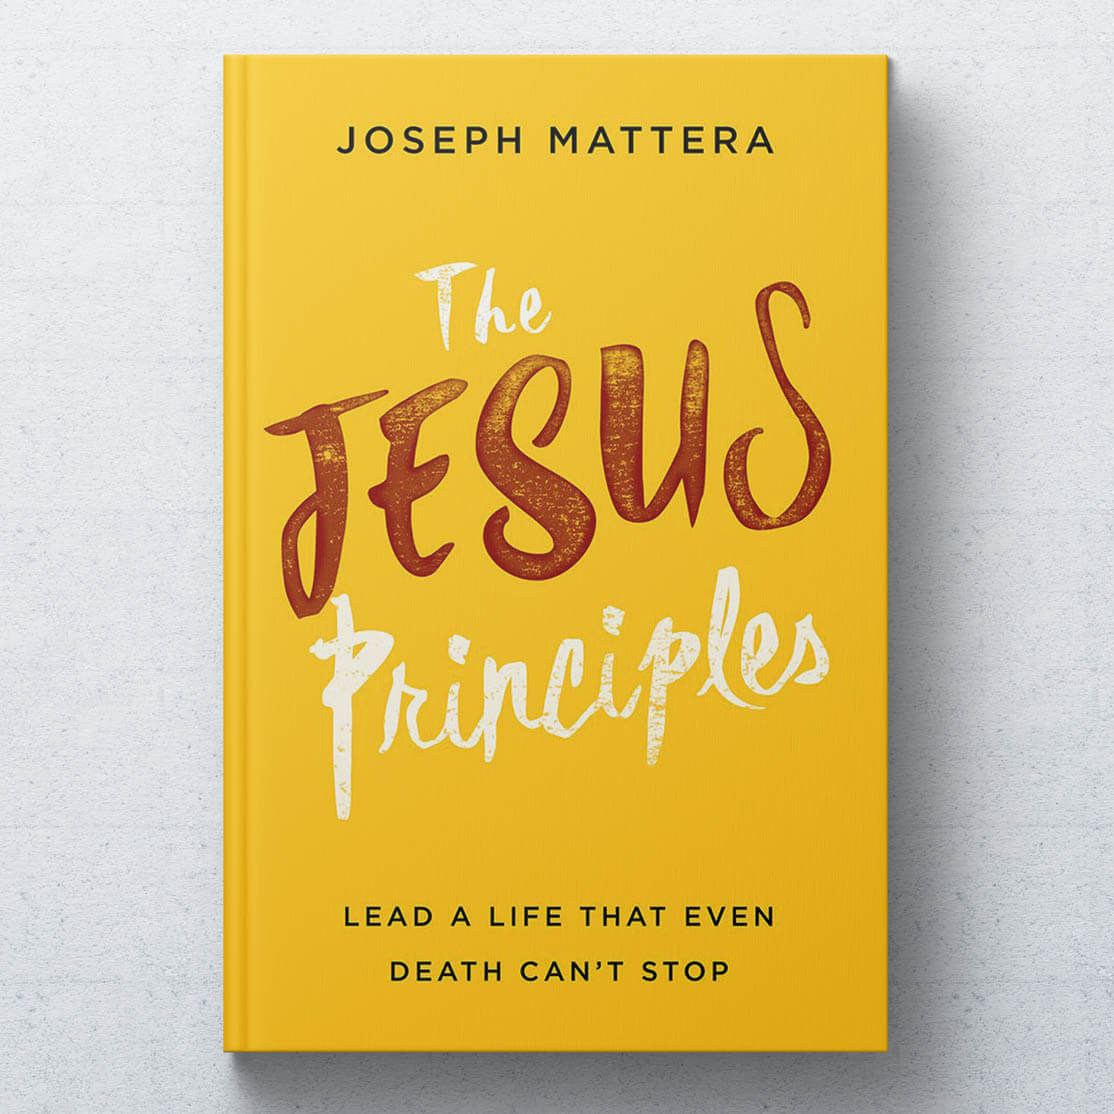 The Jesus Principles: Lead A Life That Even Death Can't Stop